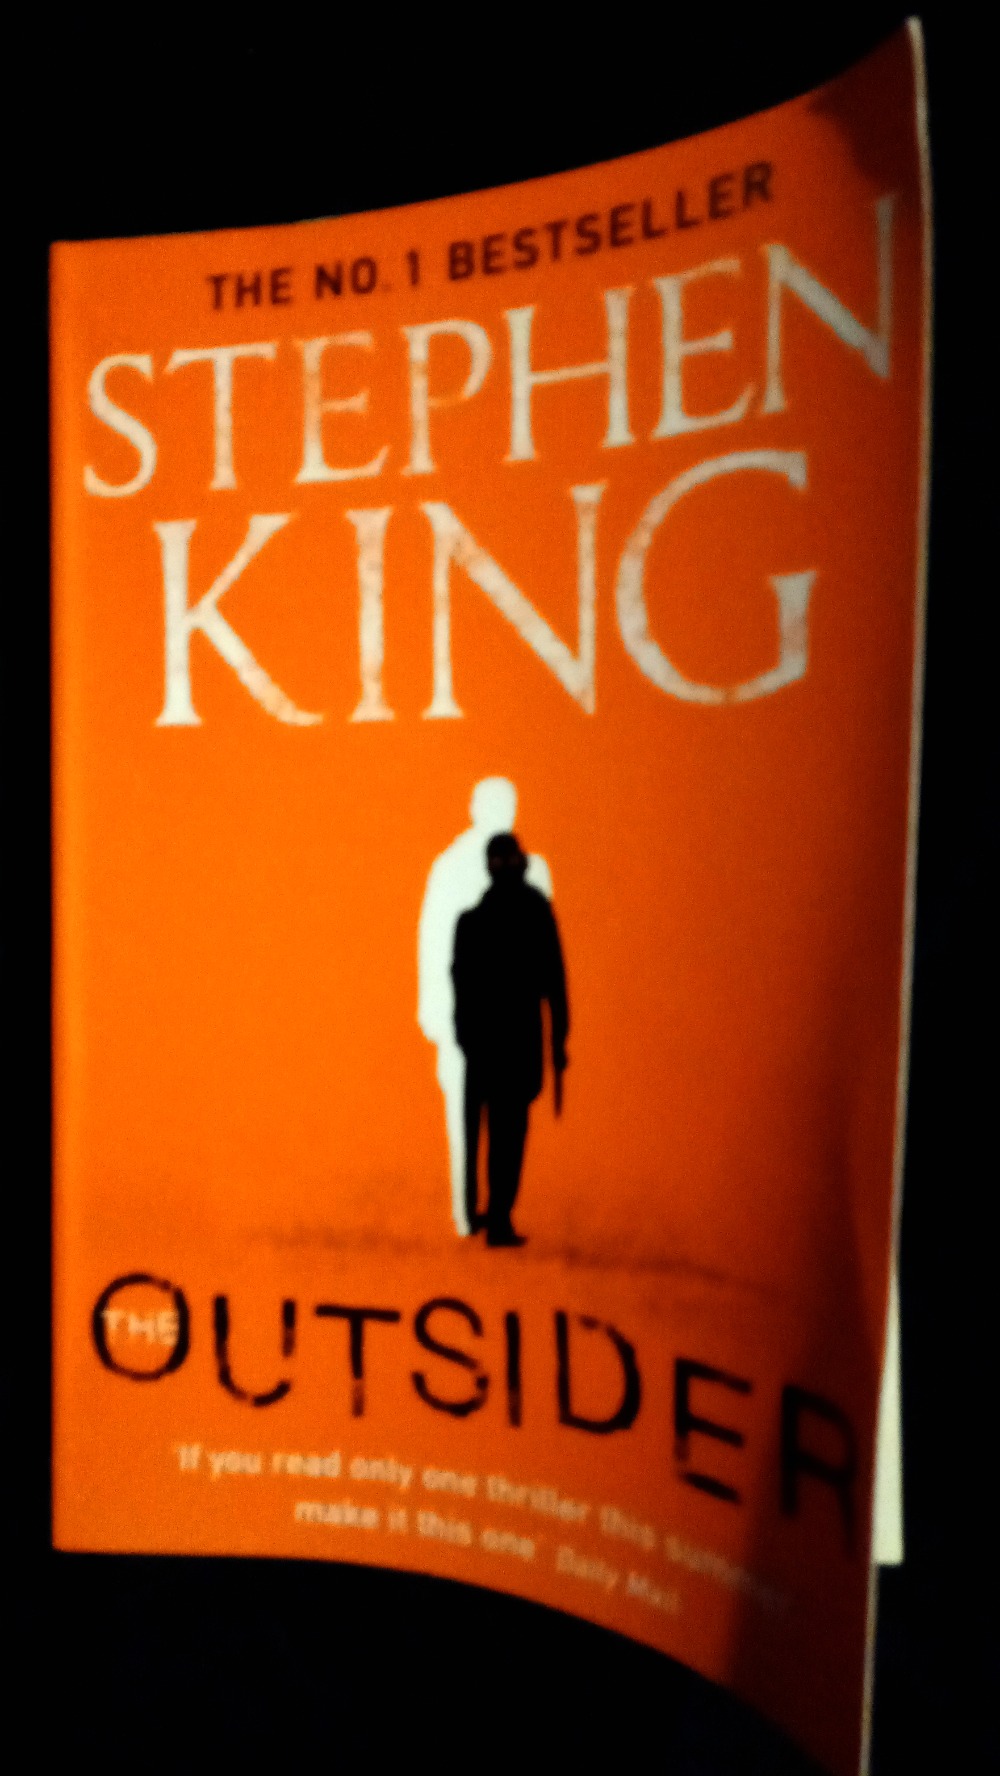 The Outsider by Stephen King: Book Review